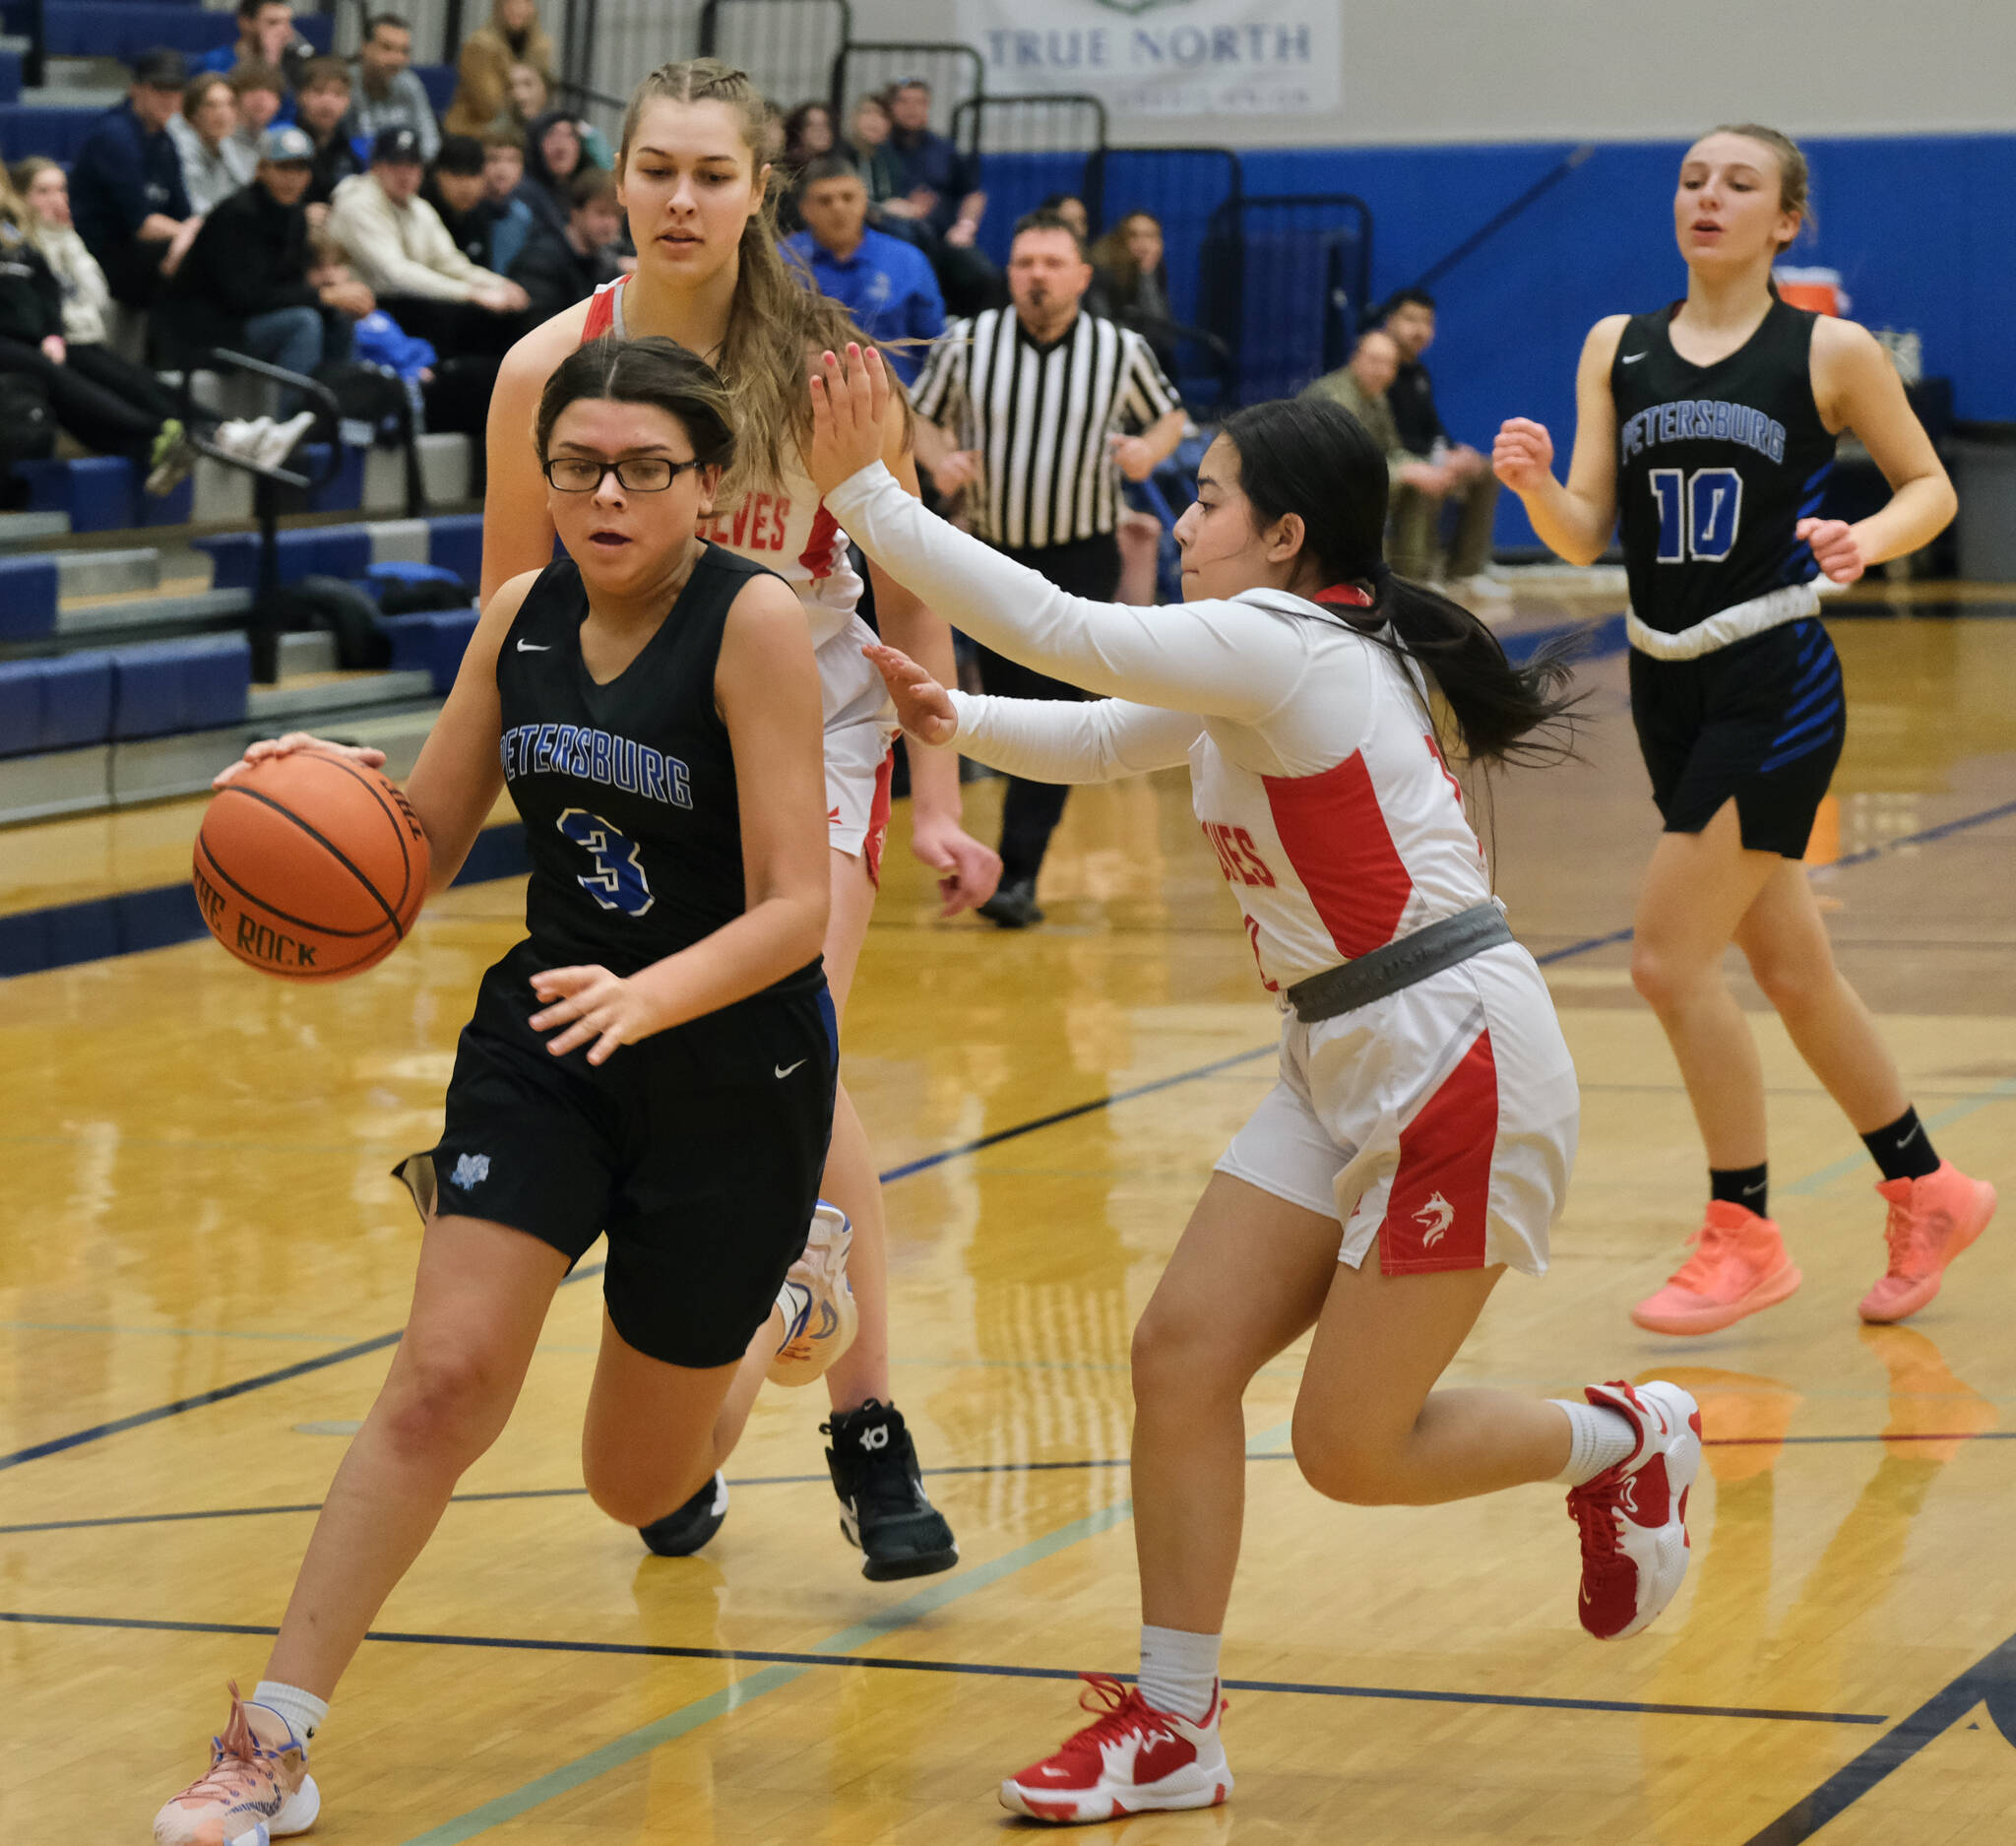 Petersburg’s Kasiah Lopez (3) drives against Wrangell’s Christina Johnson during the Region V tournament on Wednesday. (Klas Stolpe / For the Juneau Empire)